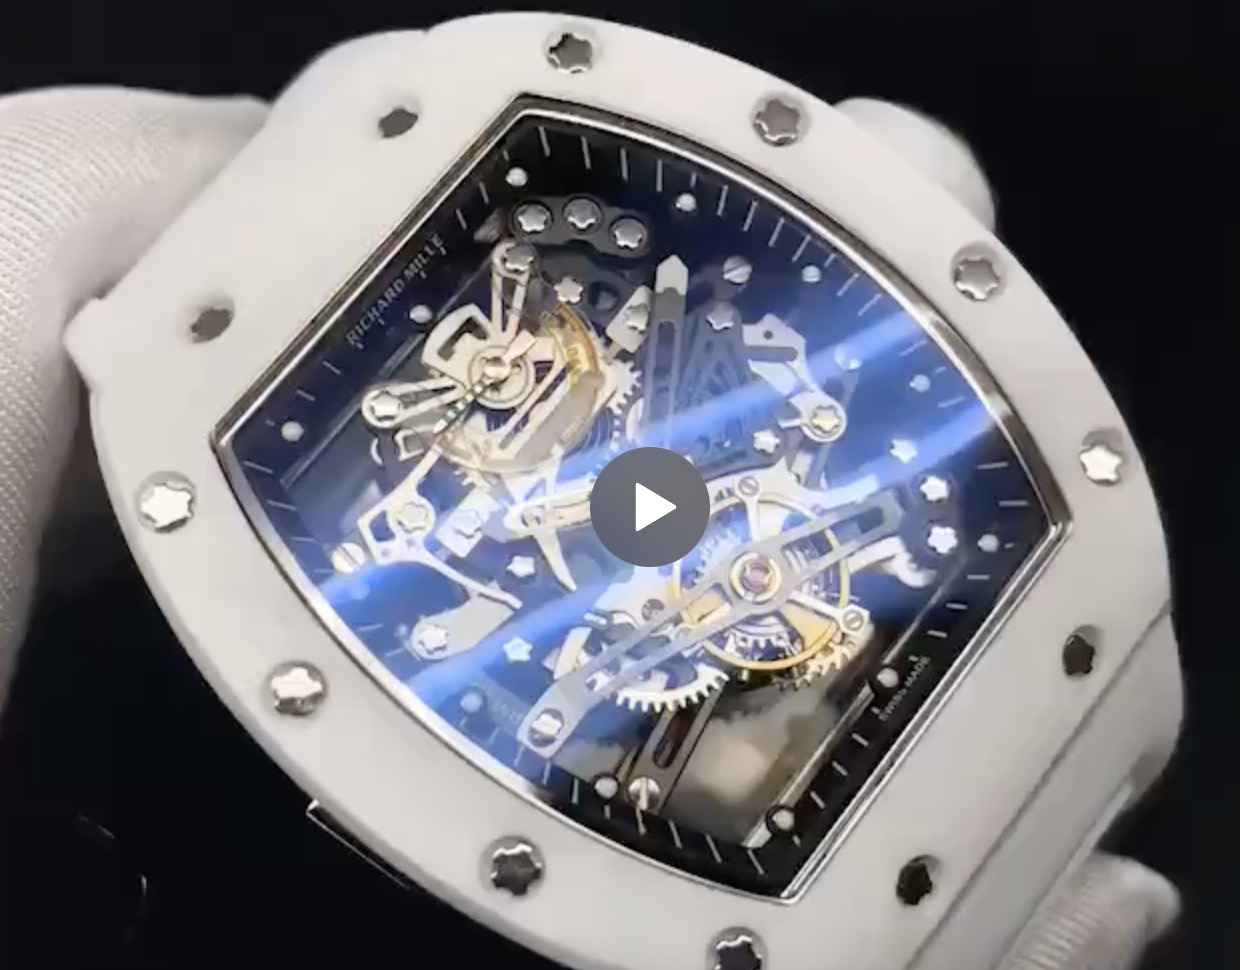 430USD for Richard mille rm38 watch